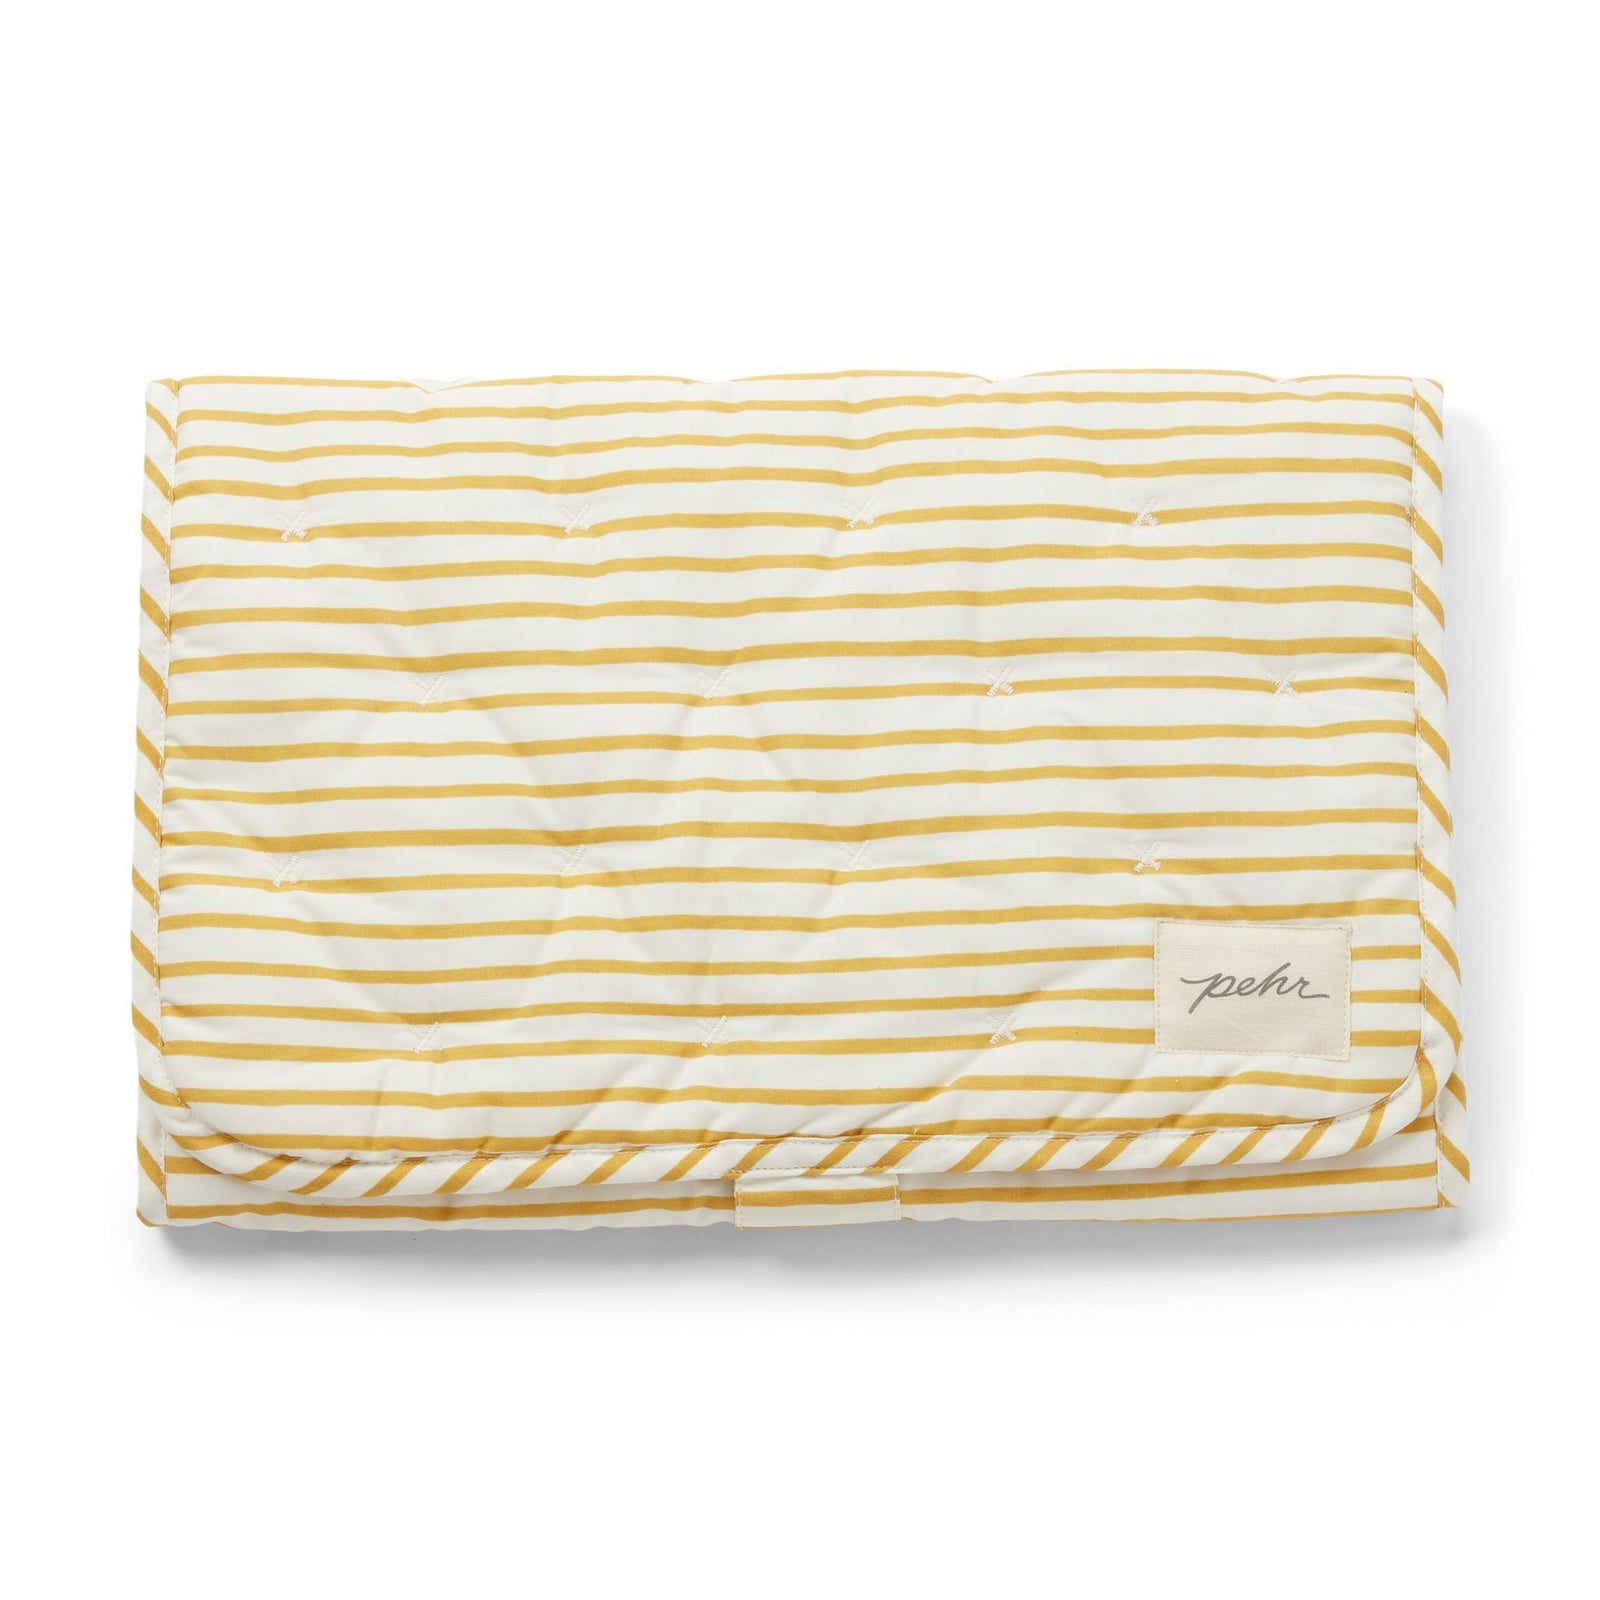 Pehr Marigold Organic On The Go Travel Change Pad folded. GOTS Certified Organic Cotton & Dyes. White with gold stripes.